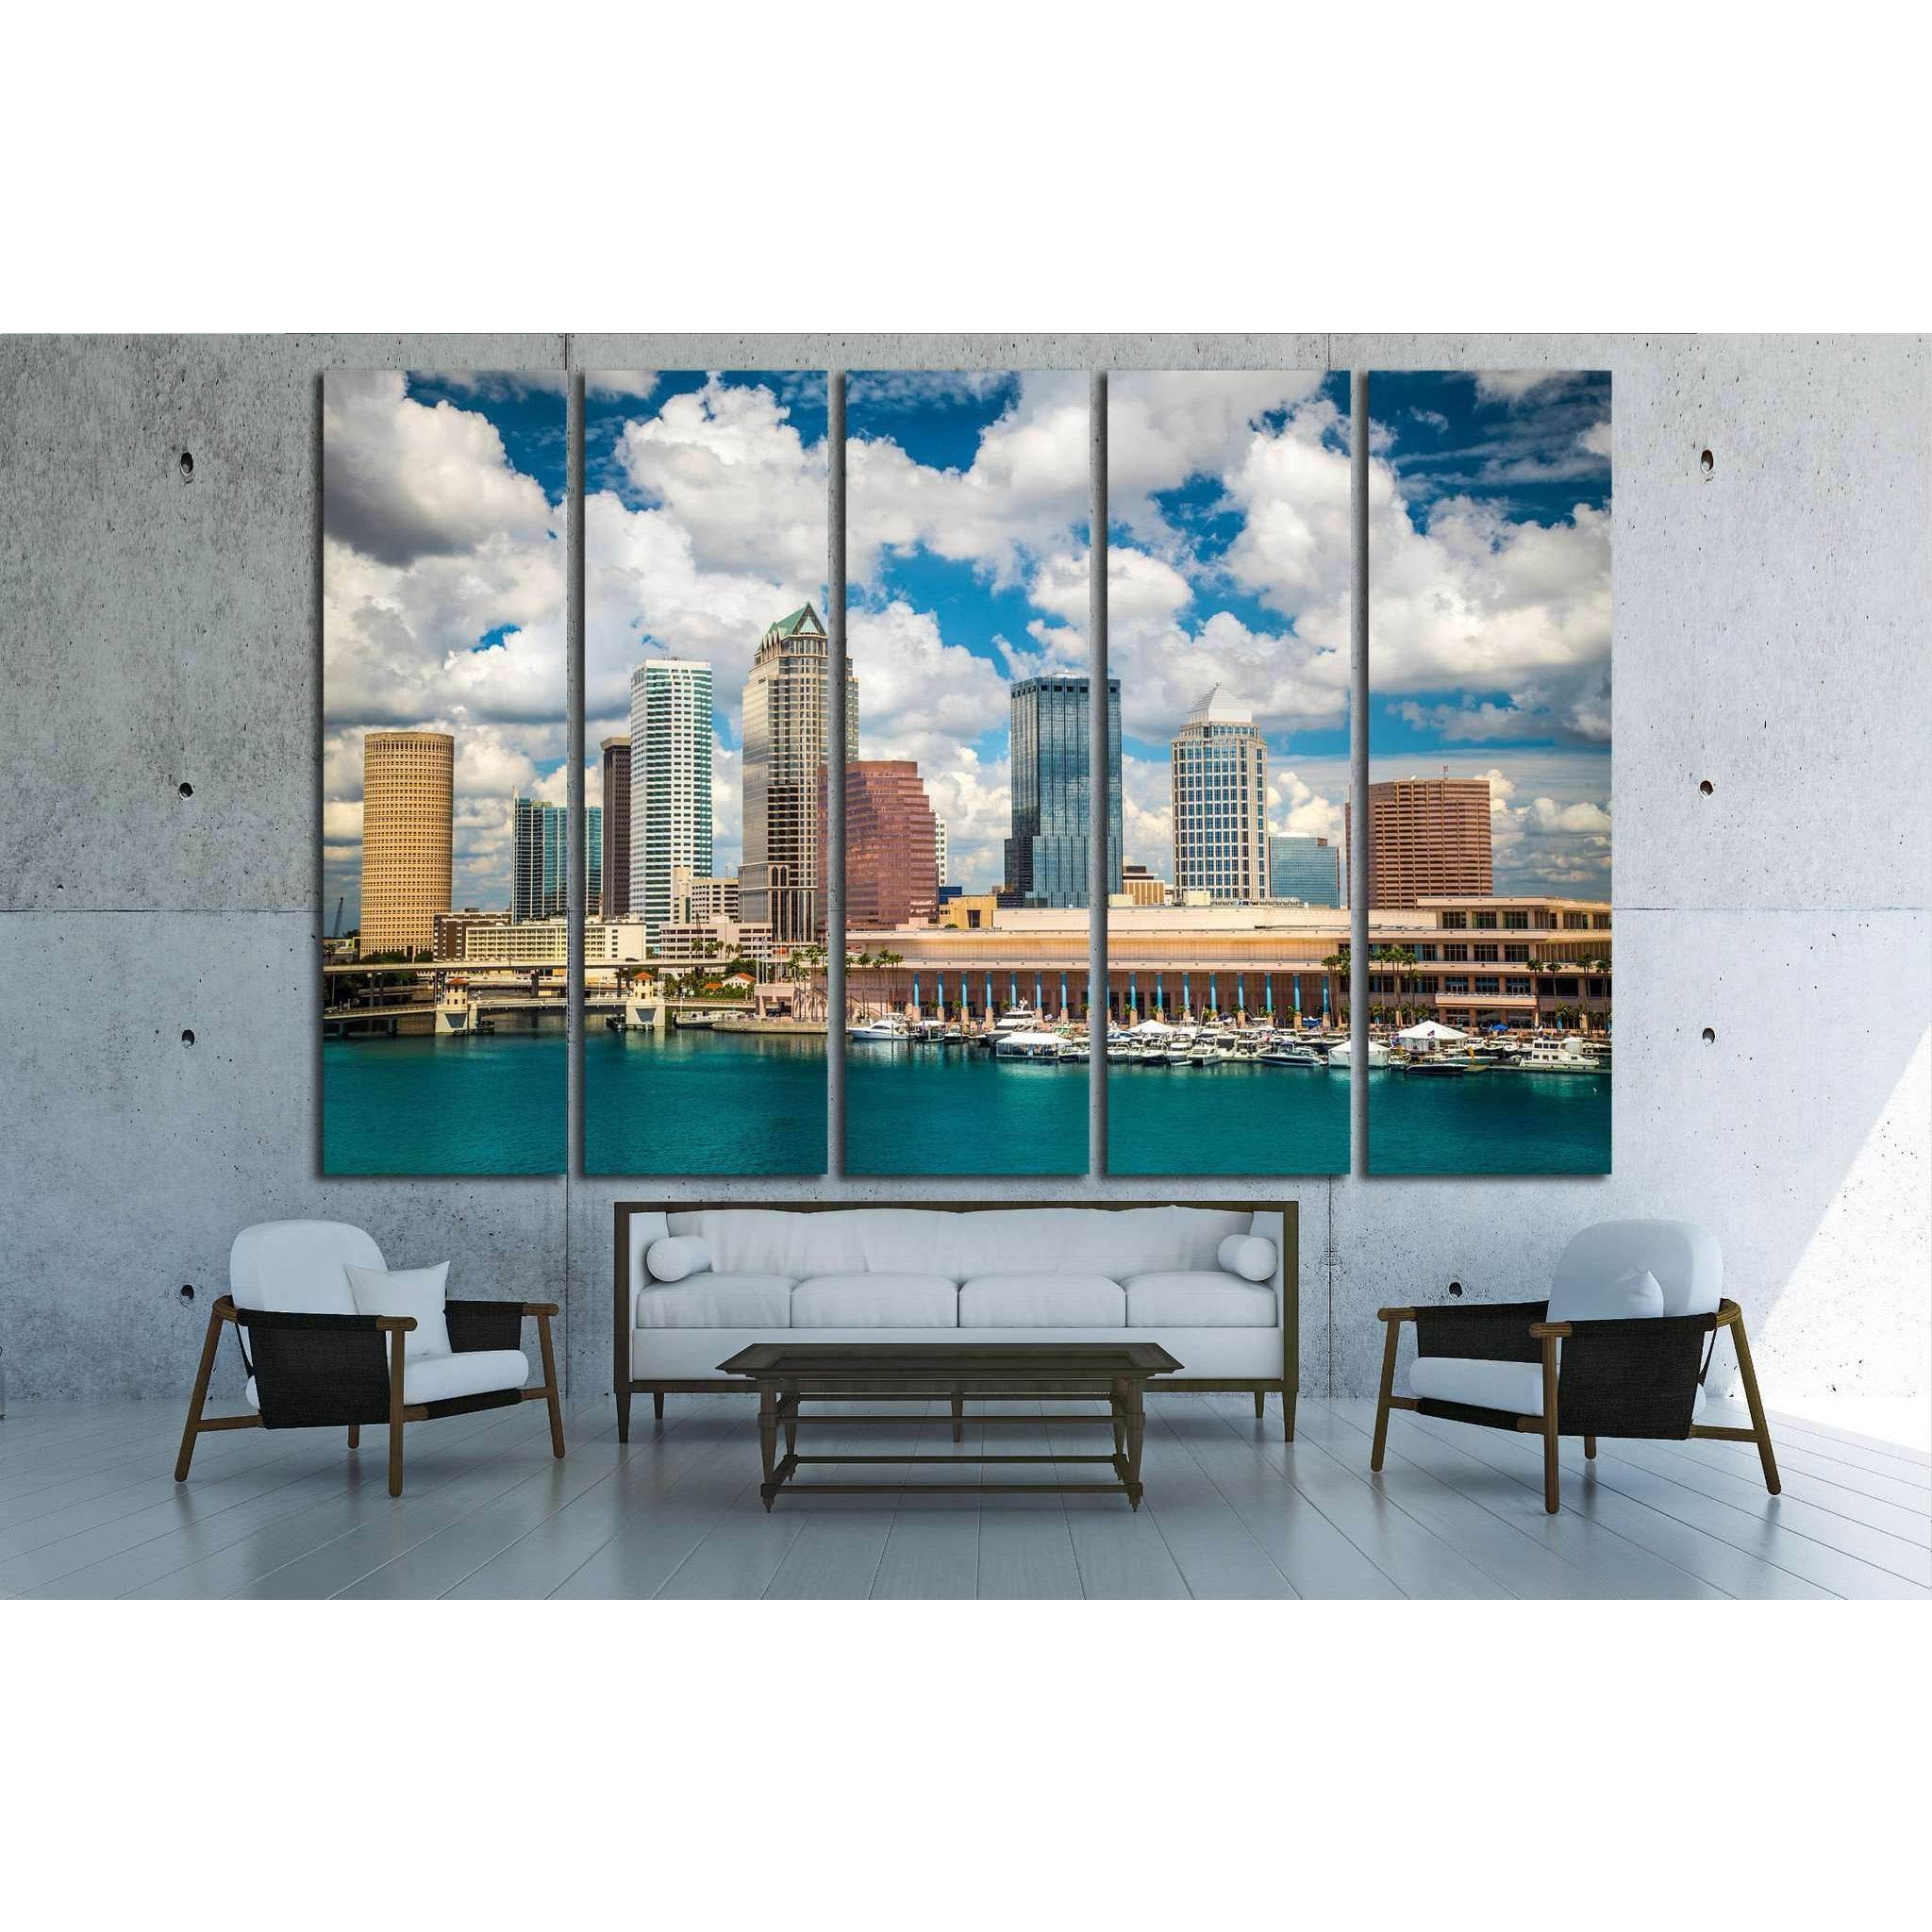 Tampa Florida skyline with sun and clouds №1677 Ready to Hang Canvas Print